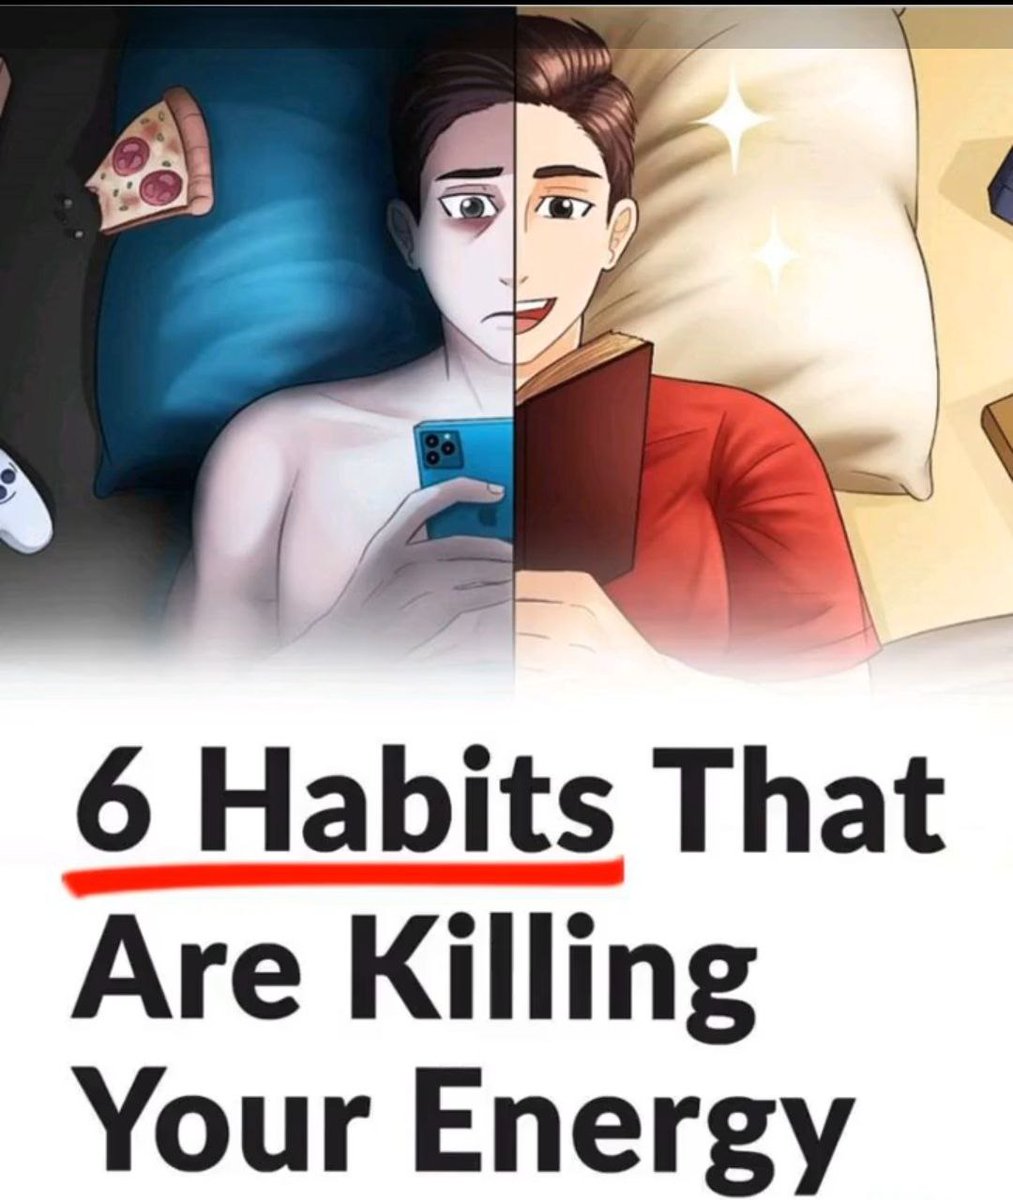 6 HABITS THAT ARE KILLING YOUR ENERGY